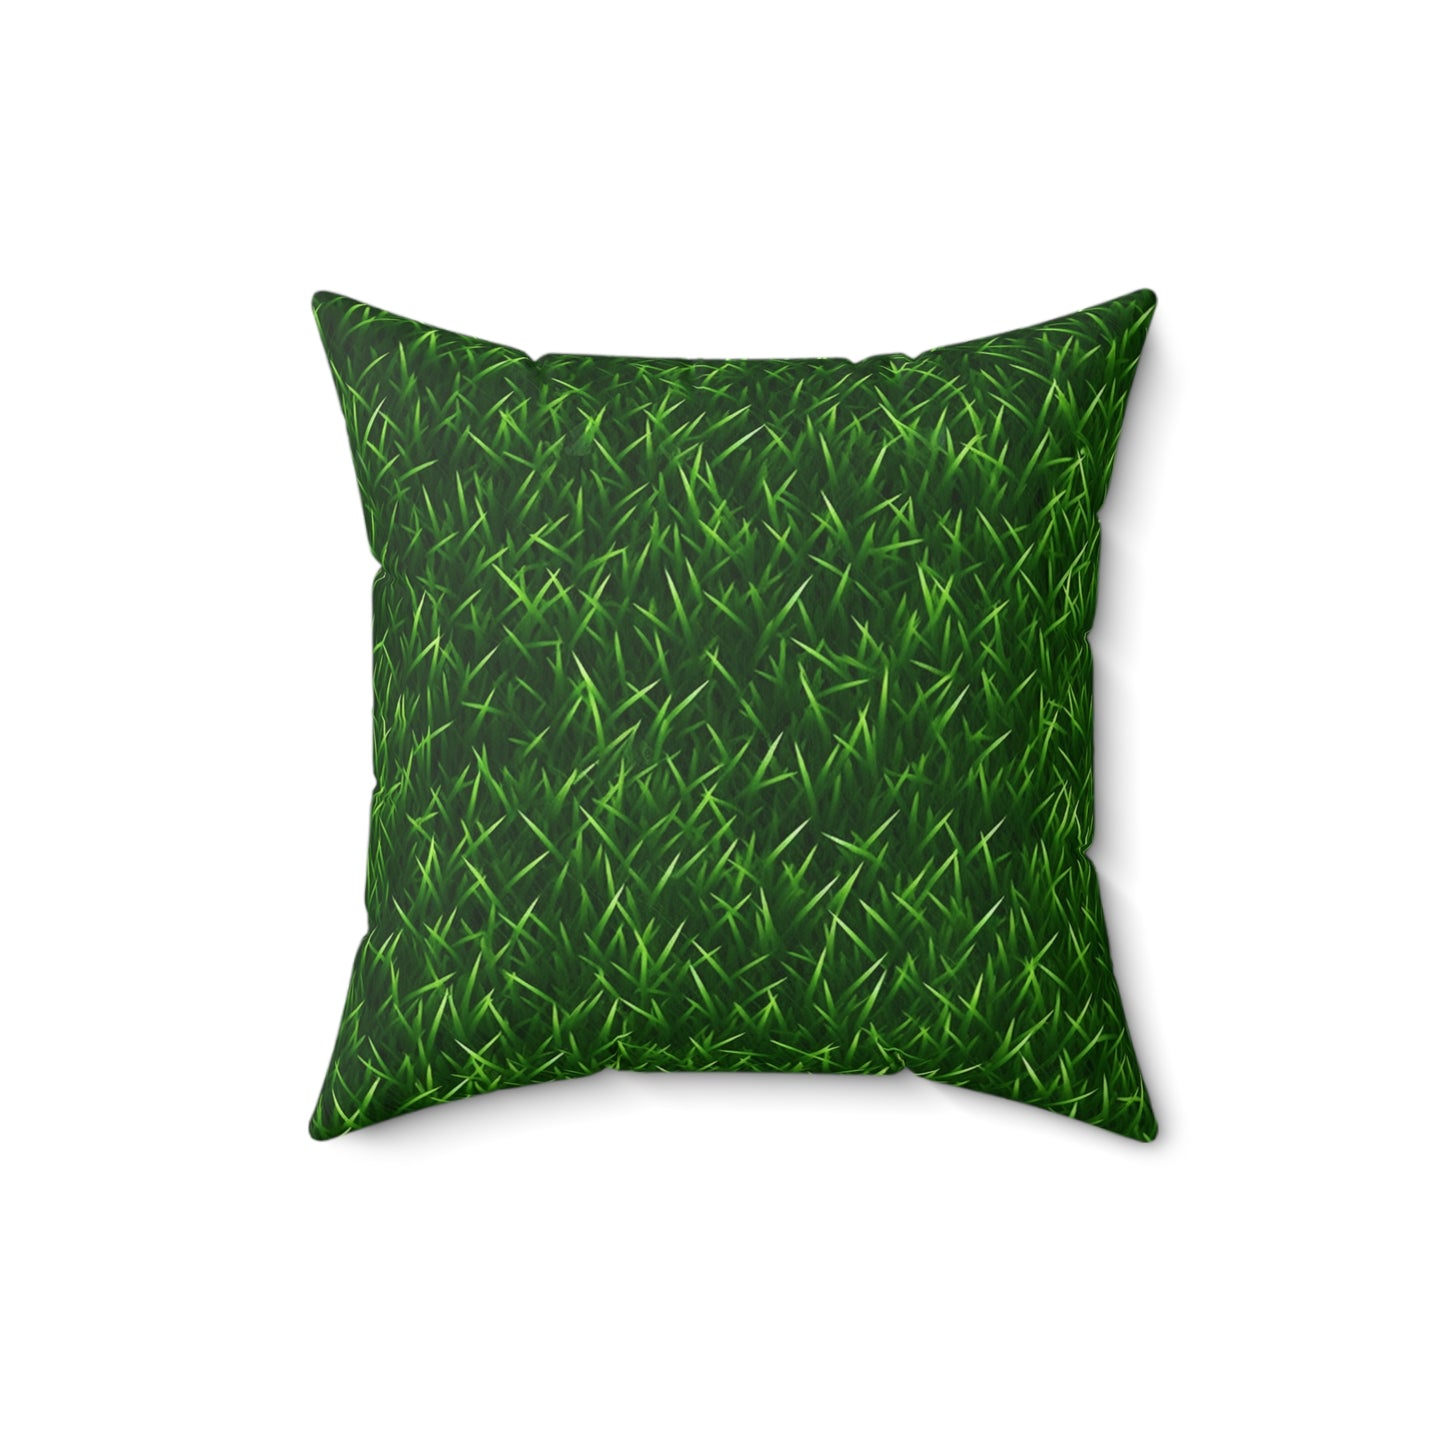 Touch Grass Indoor Style Outdoor Green Artificial Grass Turf - Spun Polyester Square Pillow